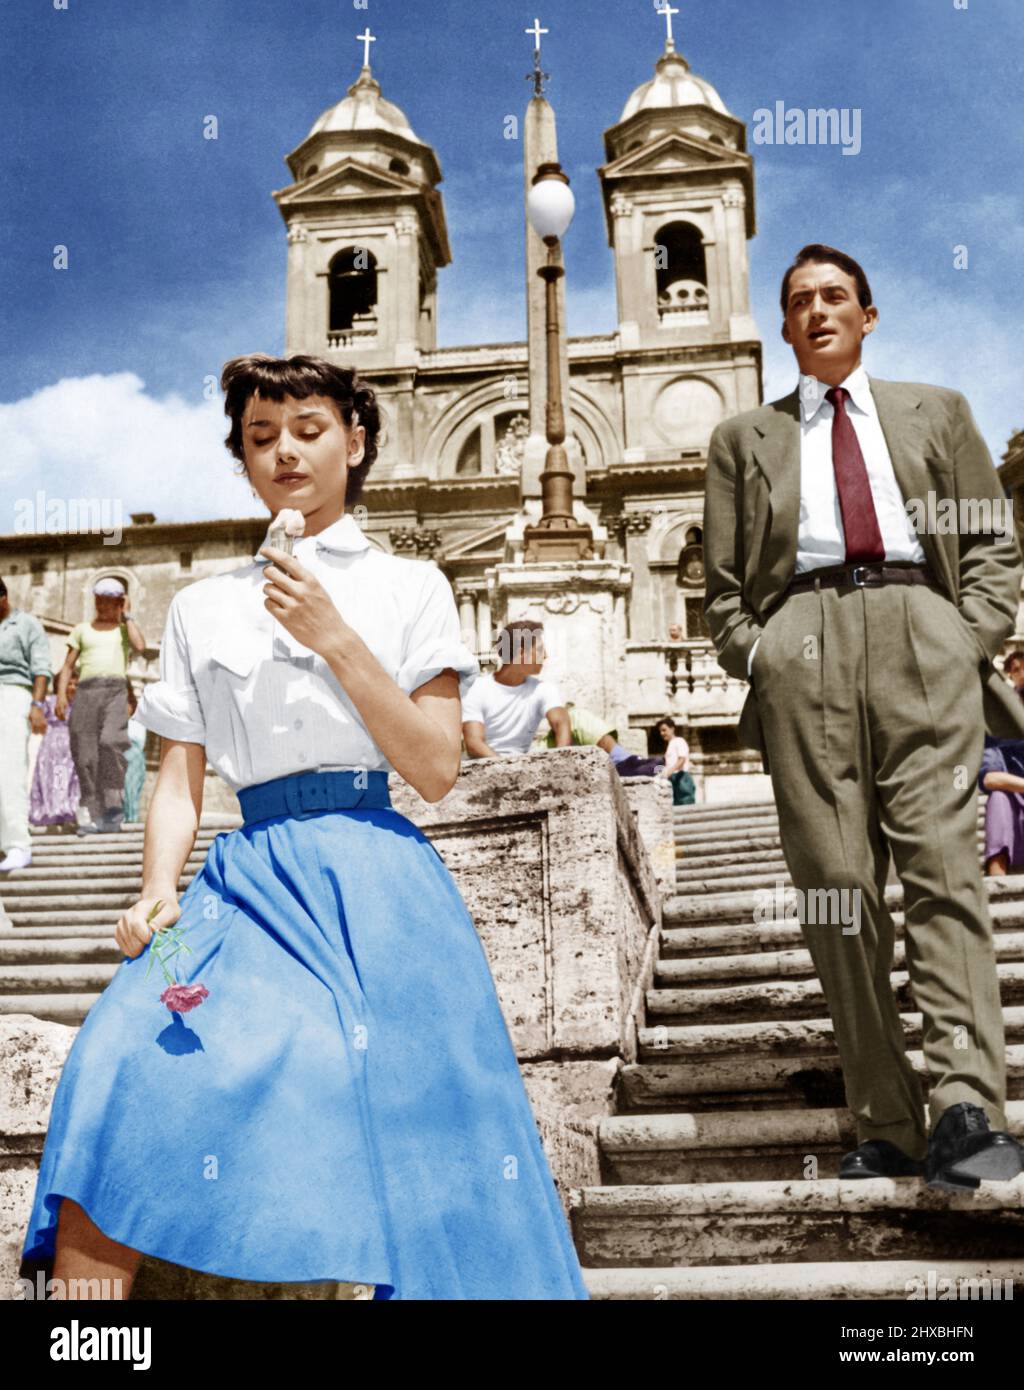 AUDREY HEPBURN and GREGORY PECK in ROMAN HOLIDAY (1953), directed by WILLIAM WYLER. Credit: PARAMOUNT PICTURES / Album Stock Photo